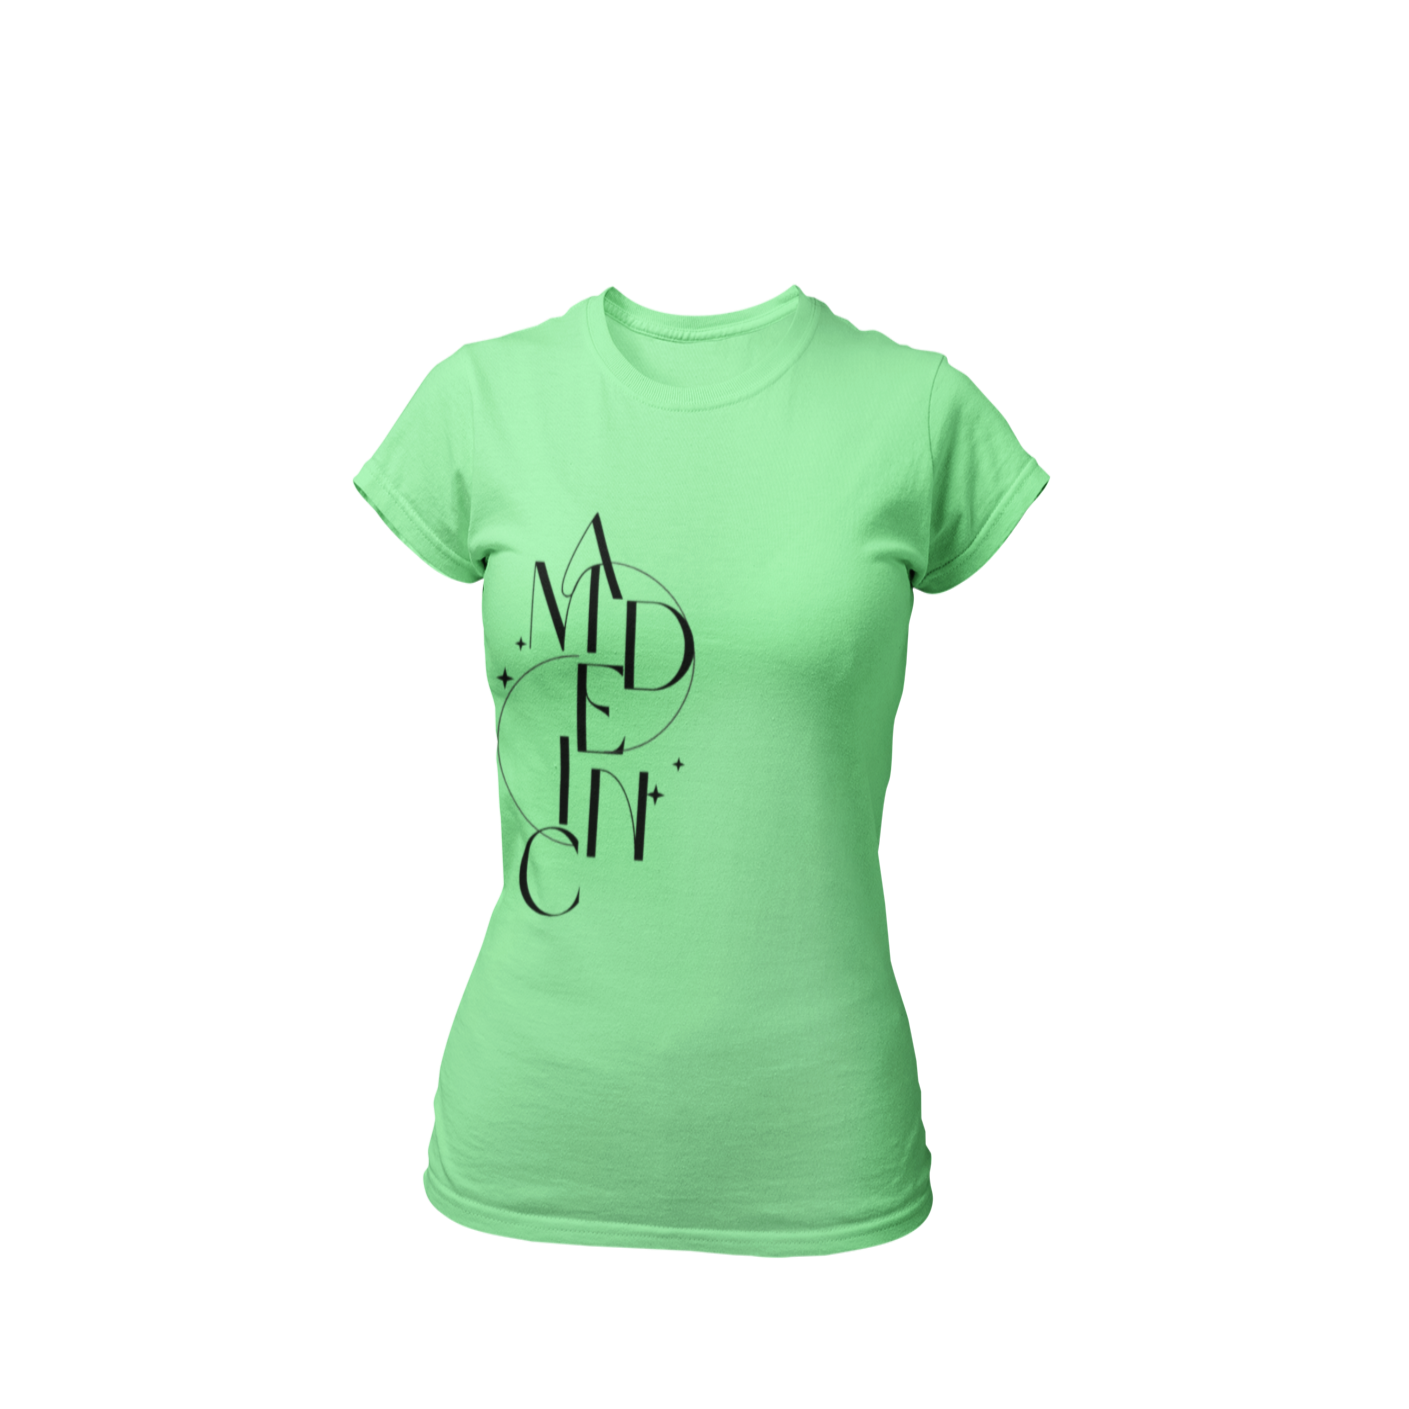 the enchanted classic tee design on a mint women crew neck t-shirt by Made Inc. BE BOLD, BE NOTICED, STAND OUT.